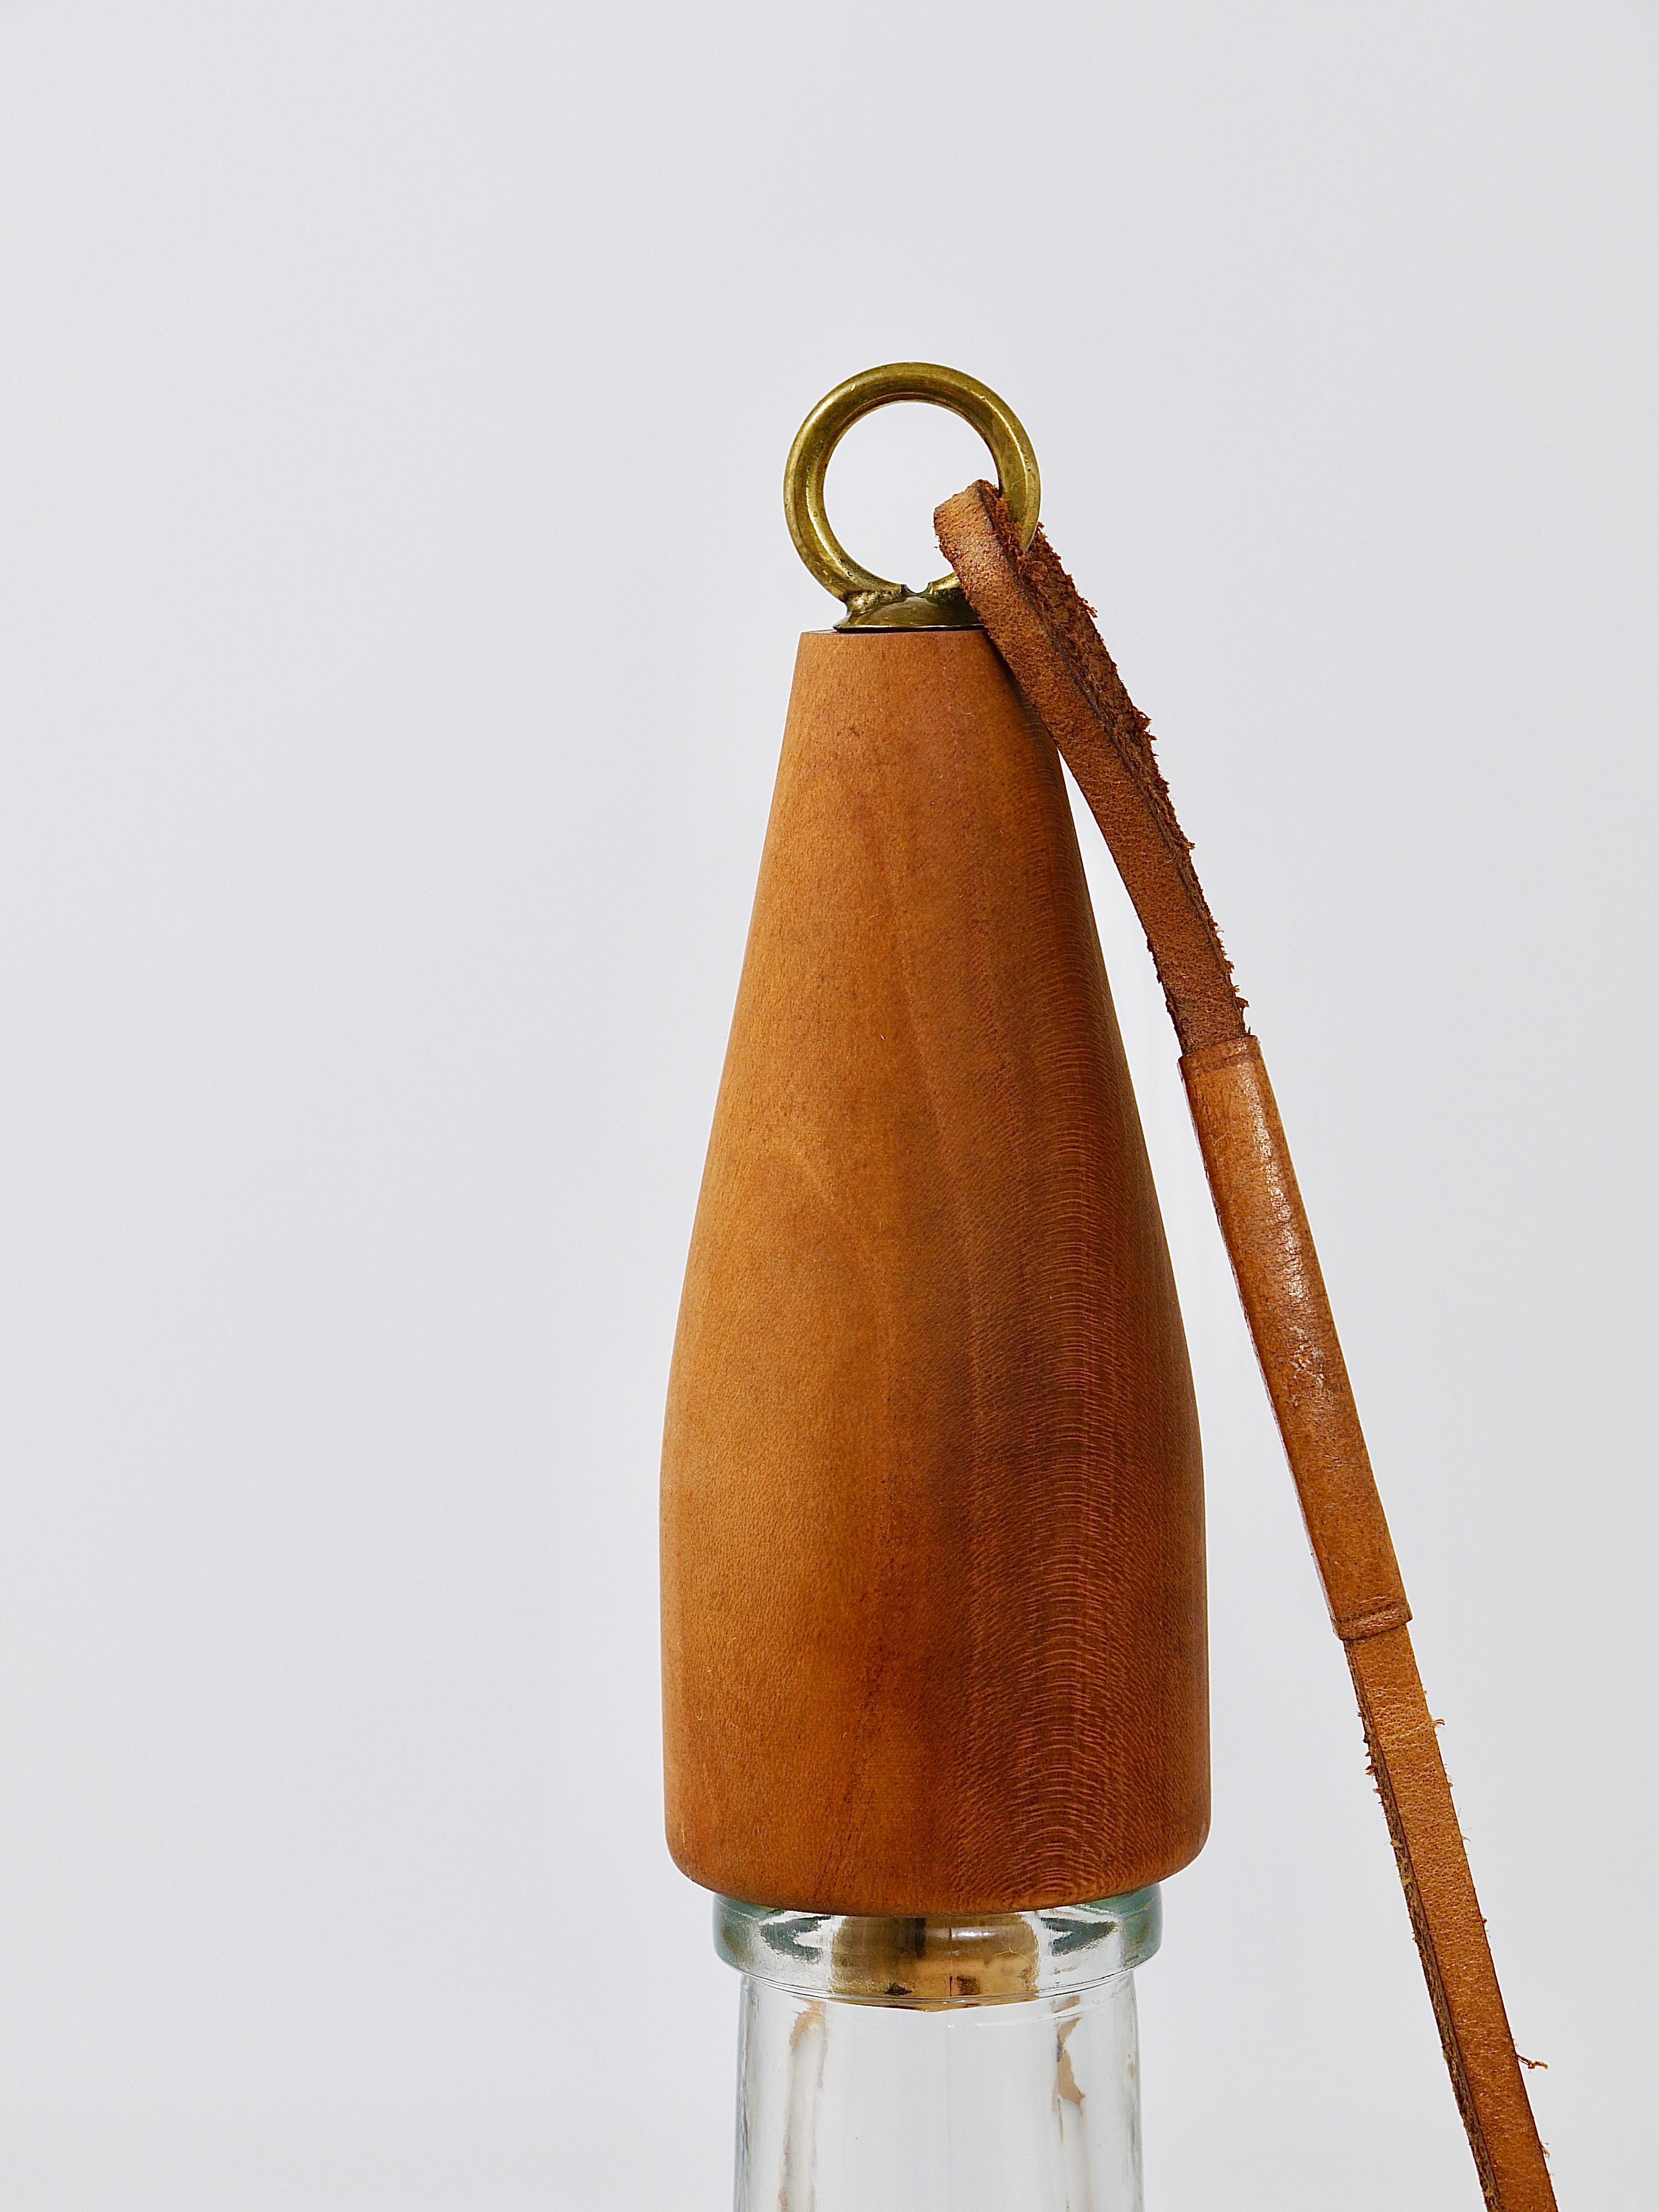 A beautiful Austrian modernist bottle stopper, made of walnut and brass and the original leather string, designed and executed in the 1950s by Carl Auböck, Vienna. In very good condition.